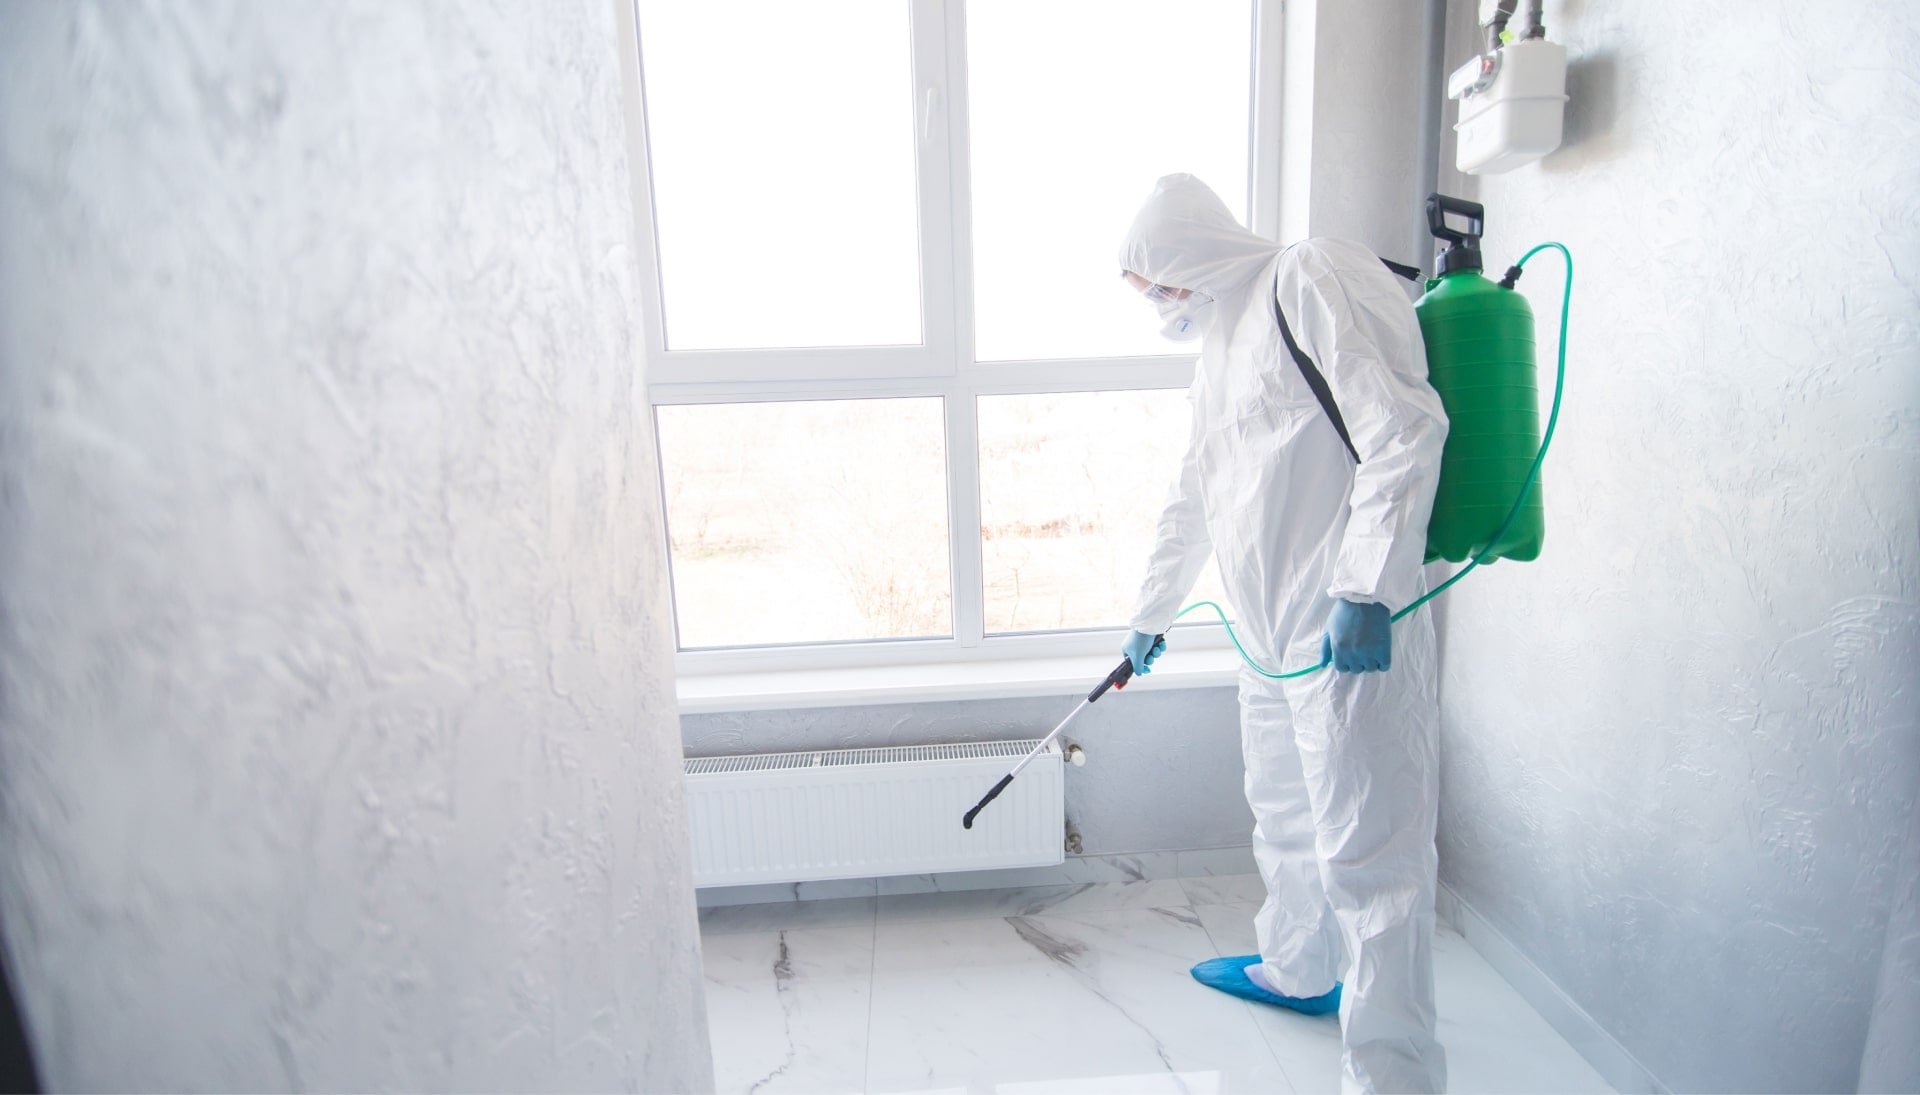 We provide the highest-quality mold inspection, testing, and removal services in the Orem, Utah area.